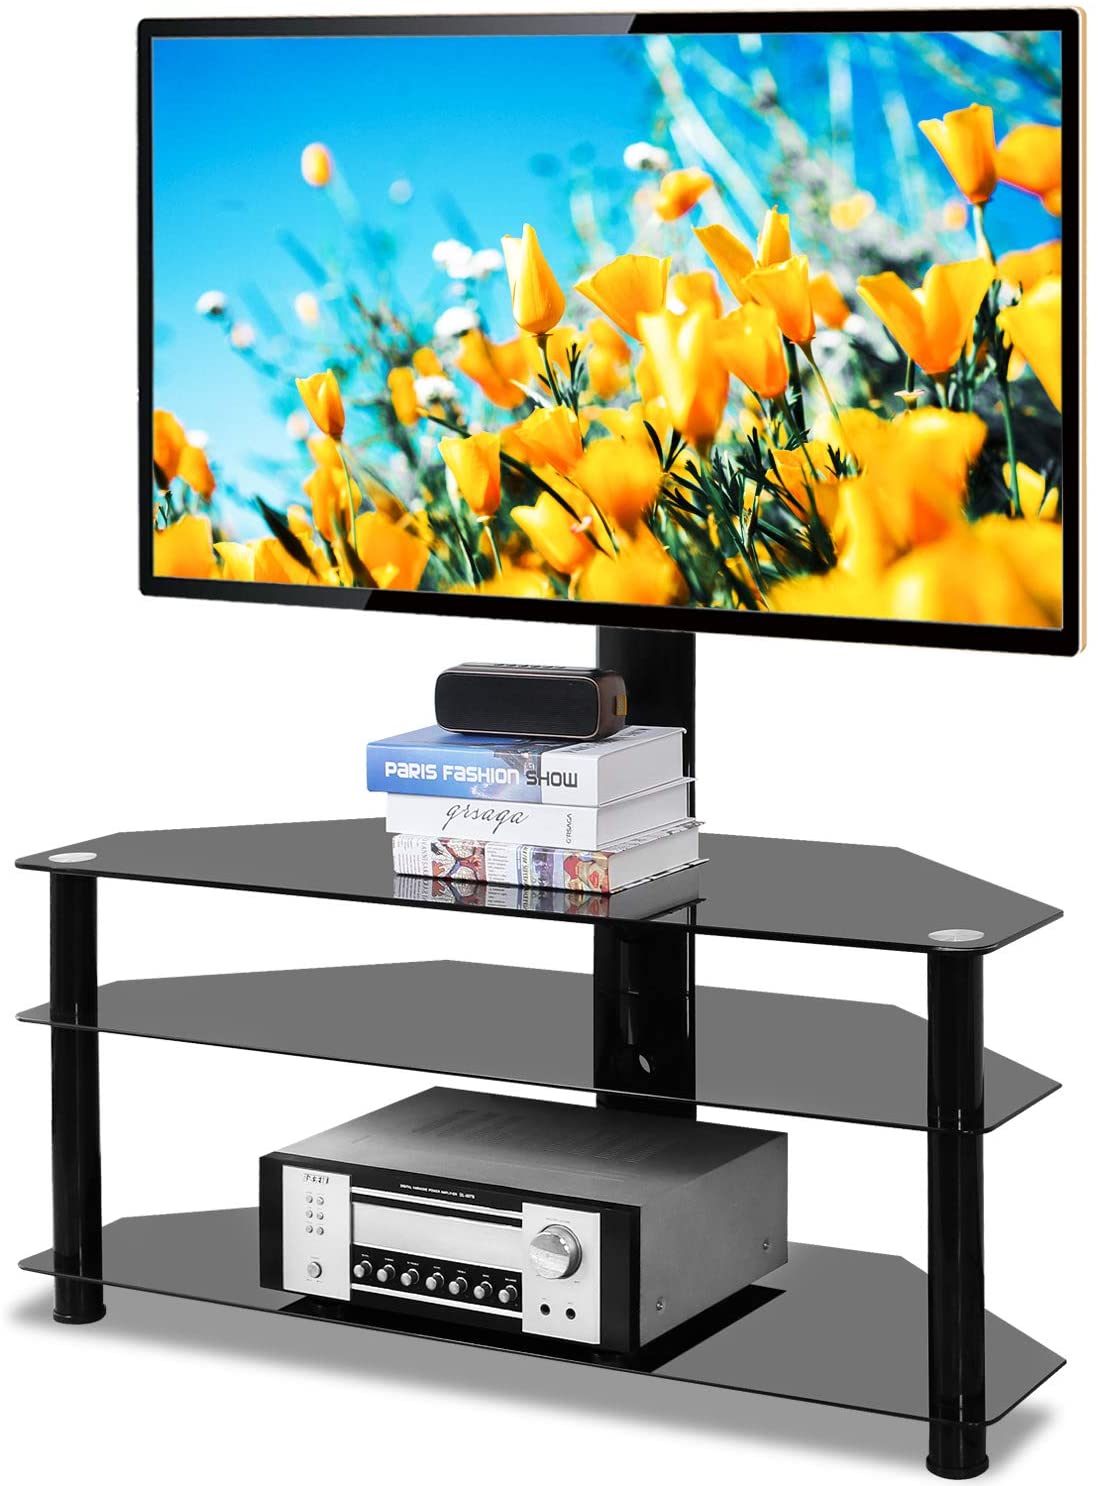 Swivel Floor TV Stand with Mount, Height and Angle Adjustable Bracket Entertainment Stand for 32 to 65-inch Plasma LCD LED Curved Screen TV, Universal TV Stand Base Holds up to 110lbs, H001 - image 2 of 9